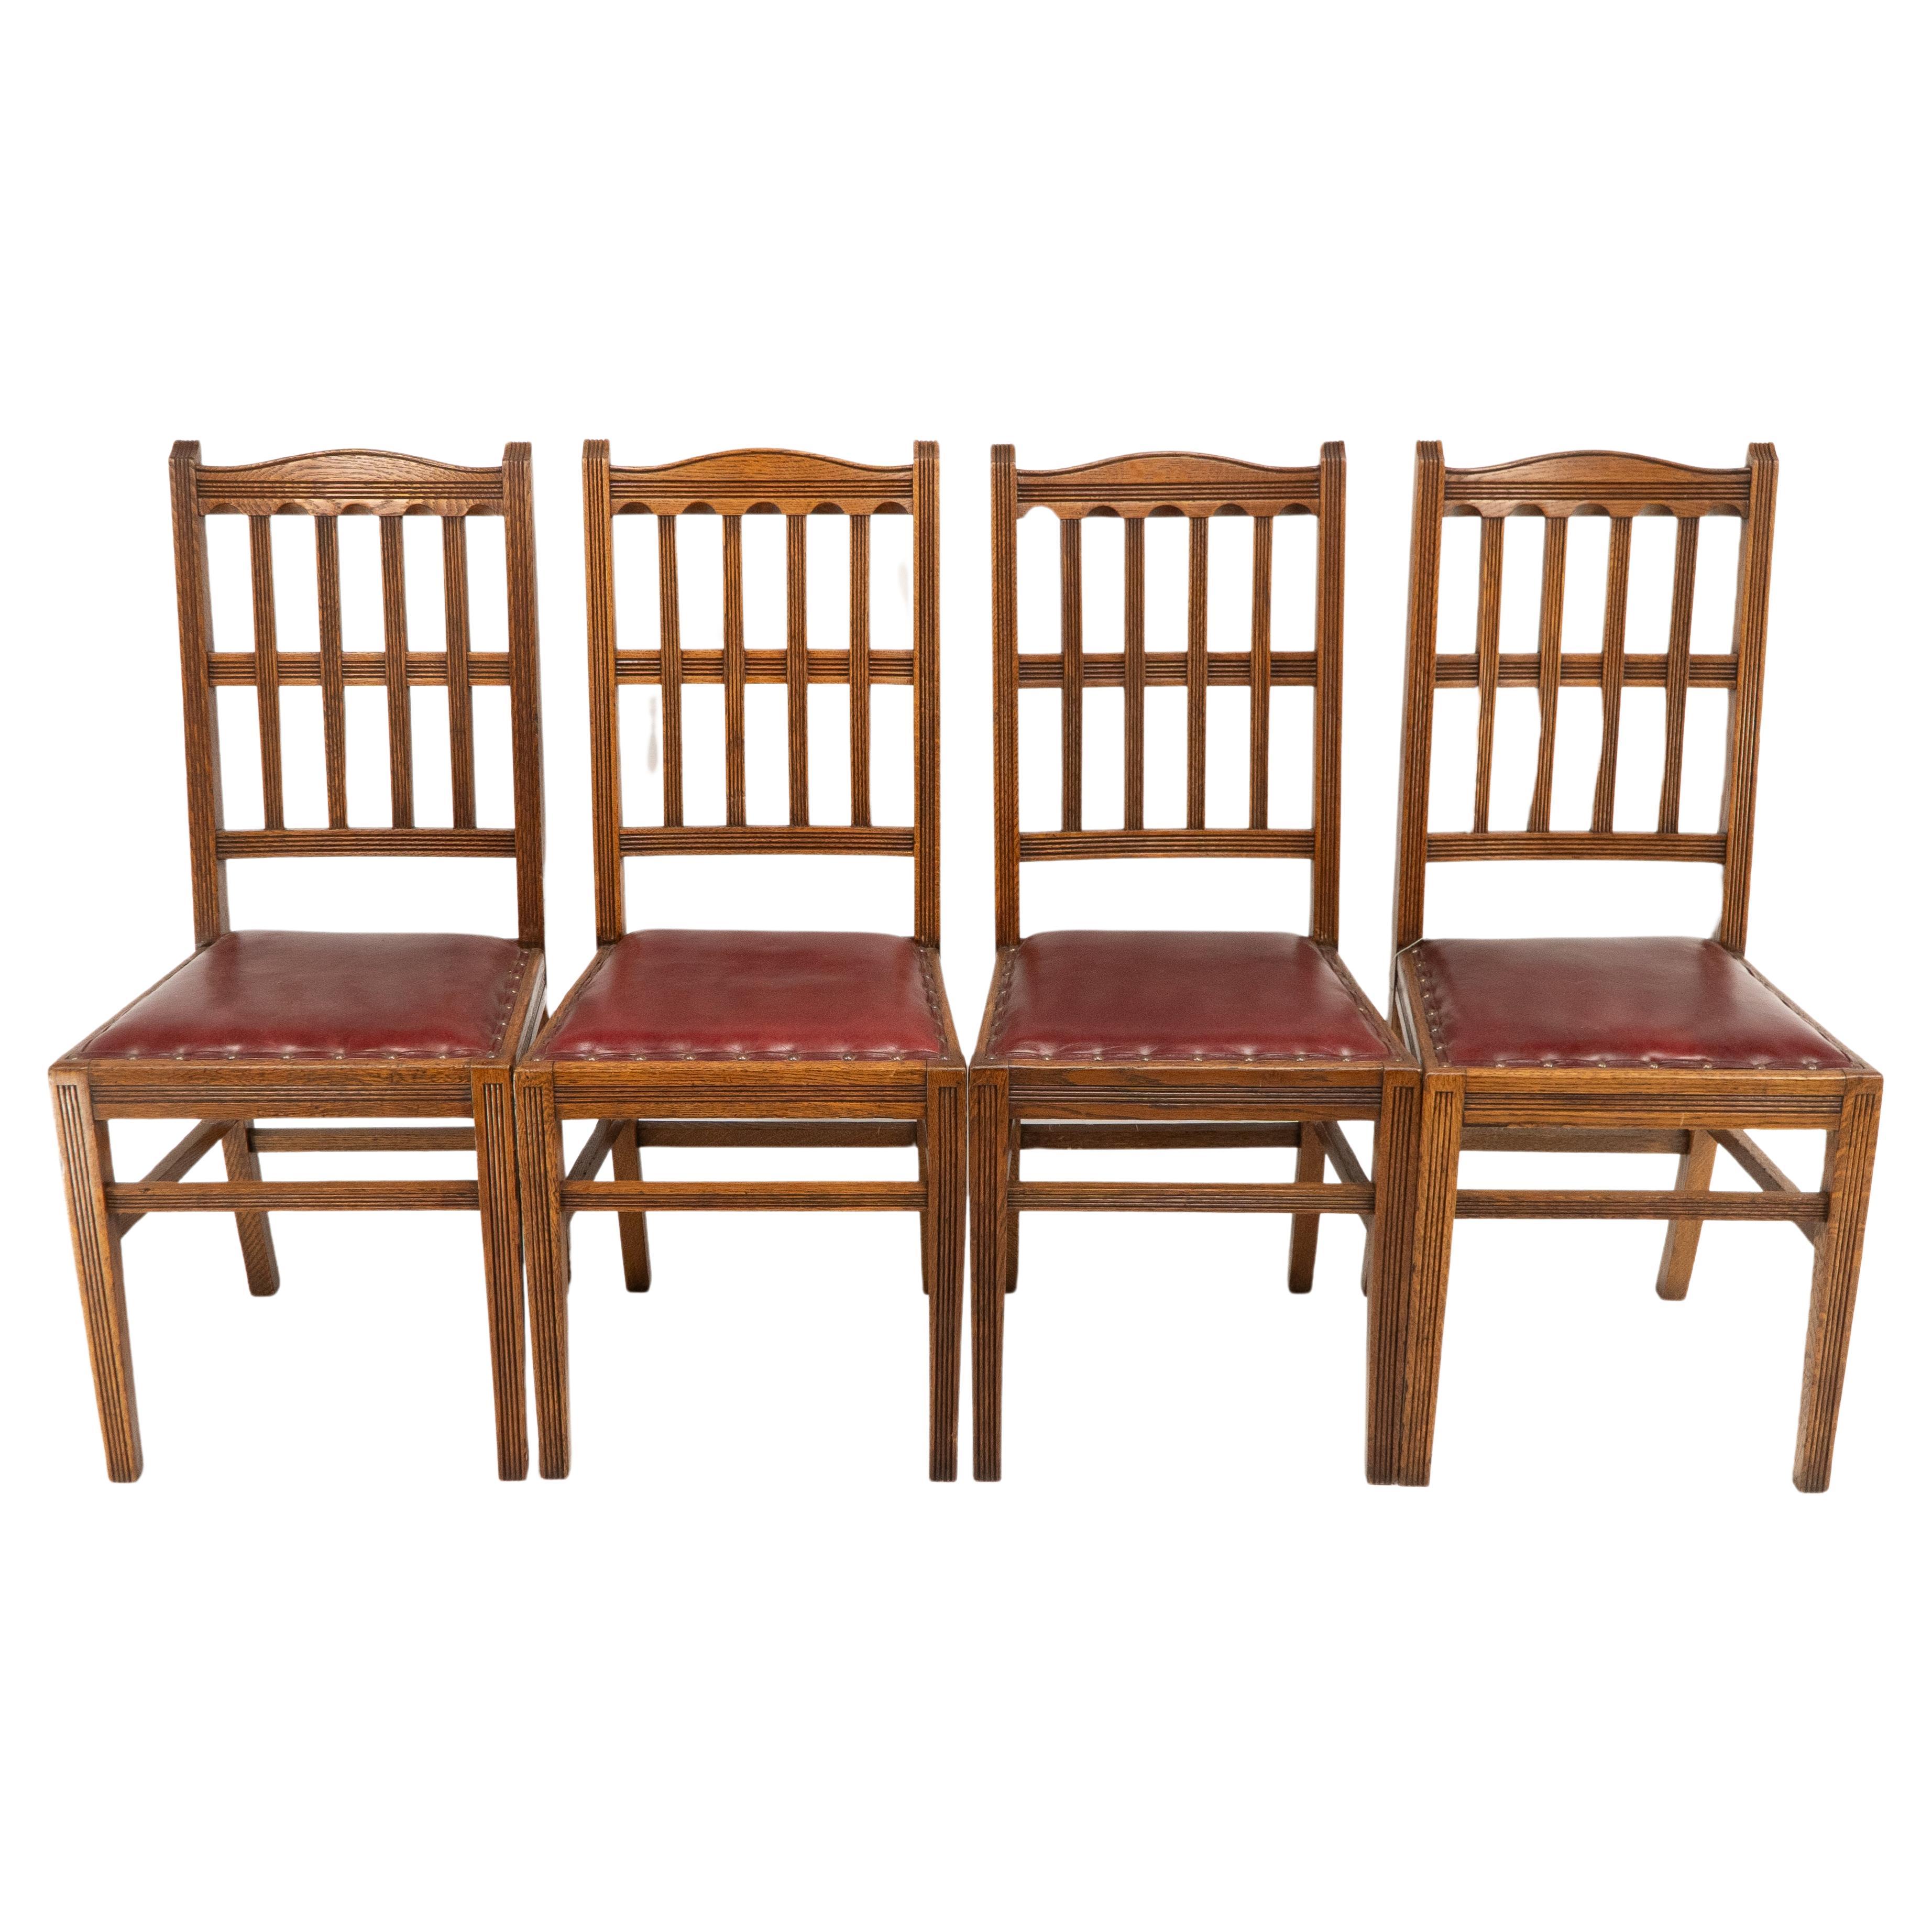 Jas Shoolbred. A set of four Aesthetic Movement lattice back oak dining chairs For Sale